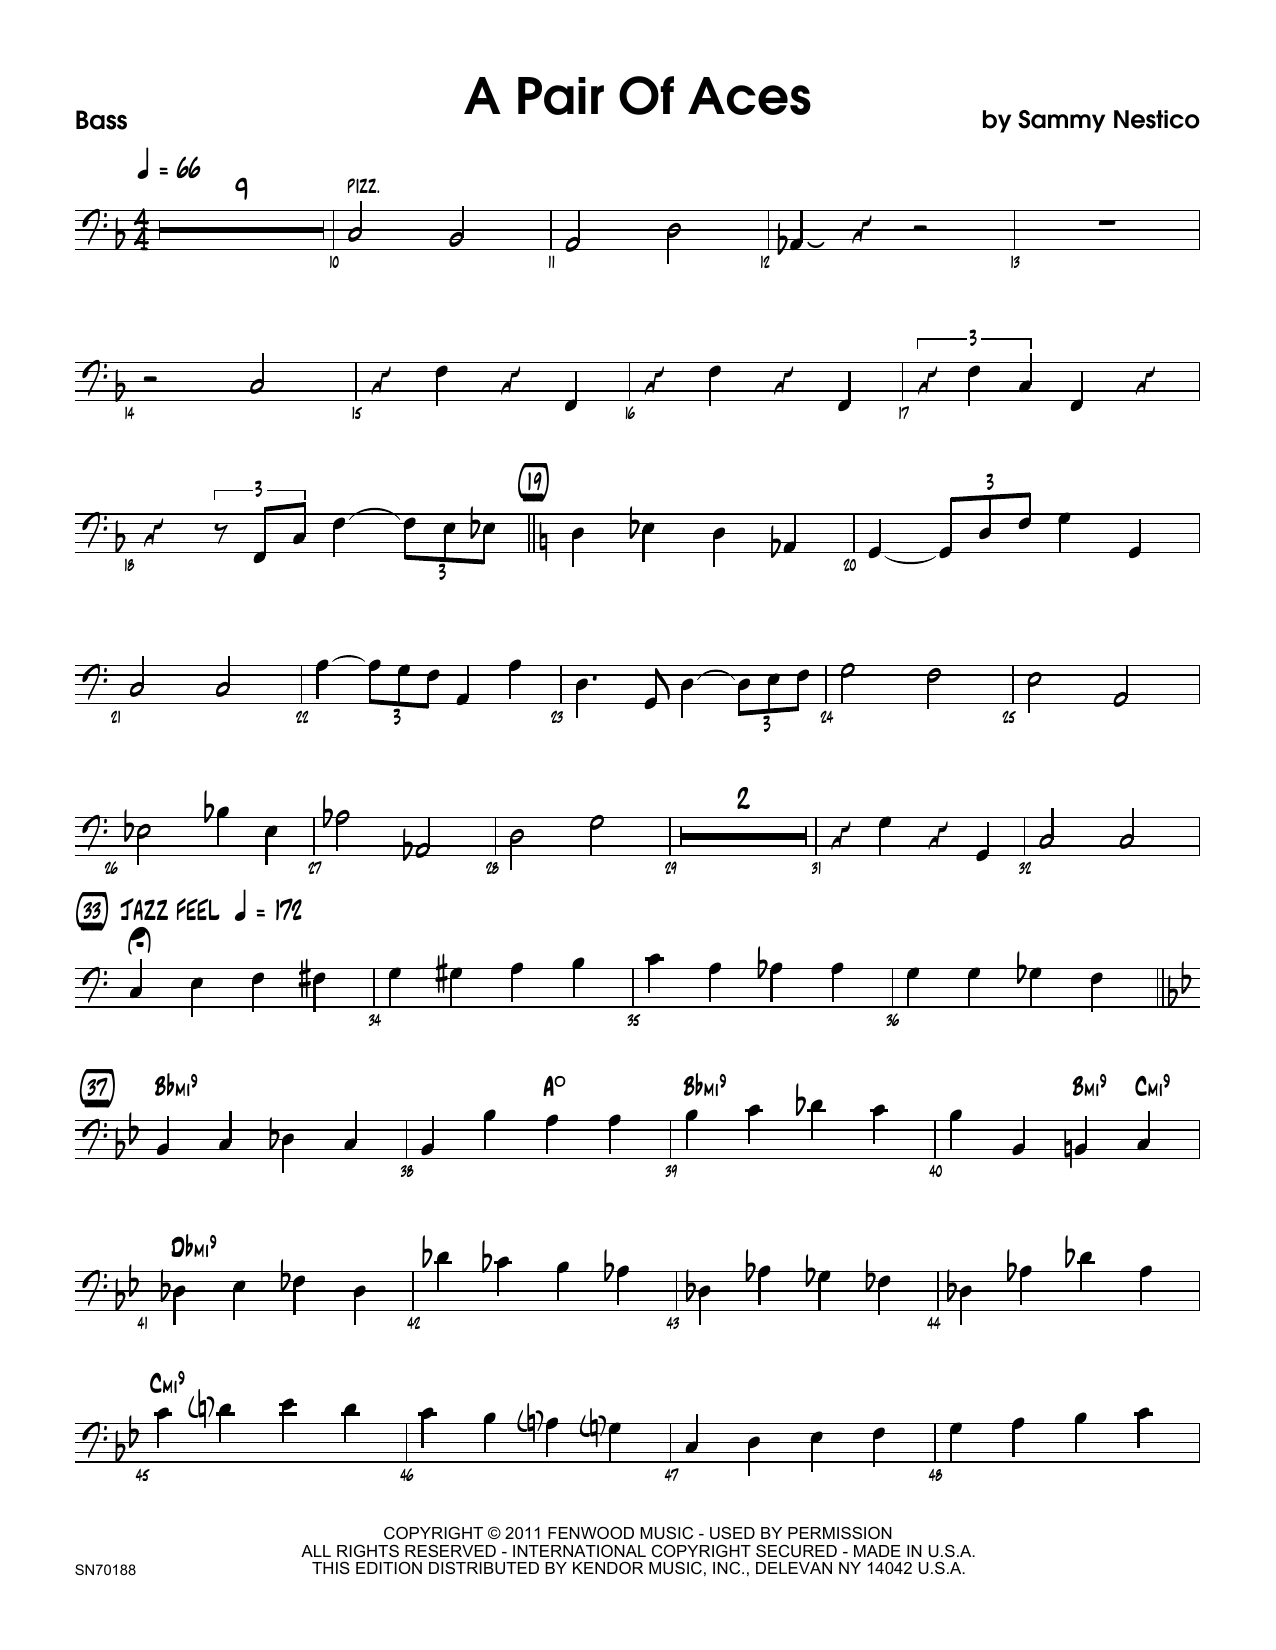 Download Sammy Nestico A Pair Of Aces - Bass Sheet Music